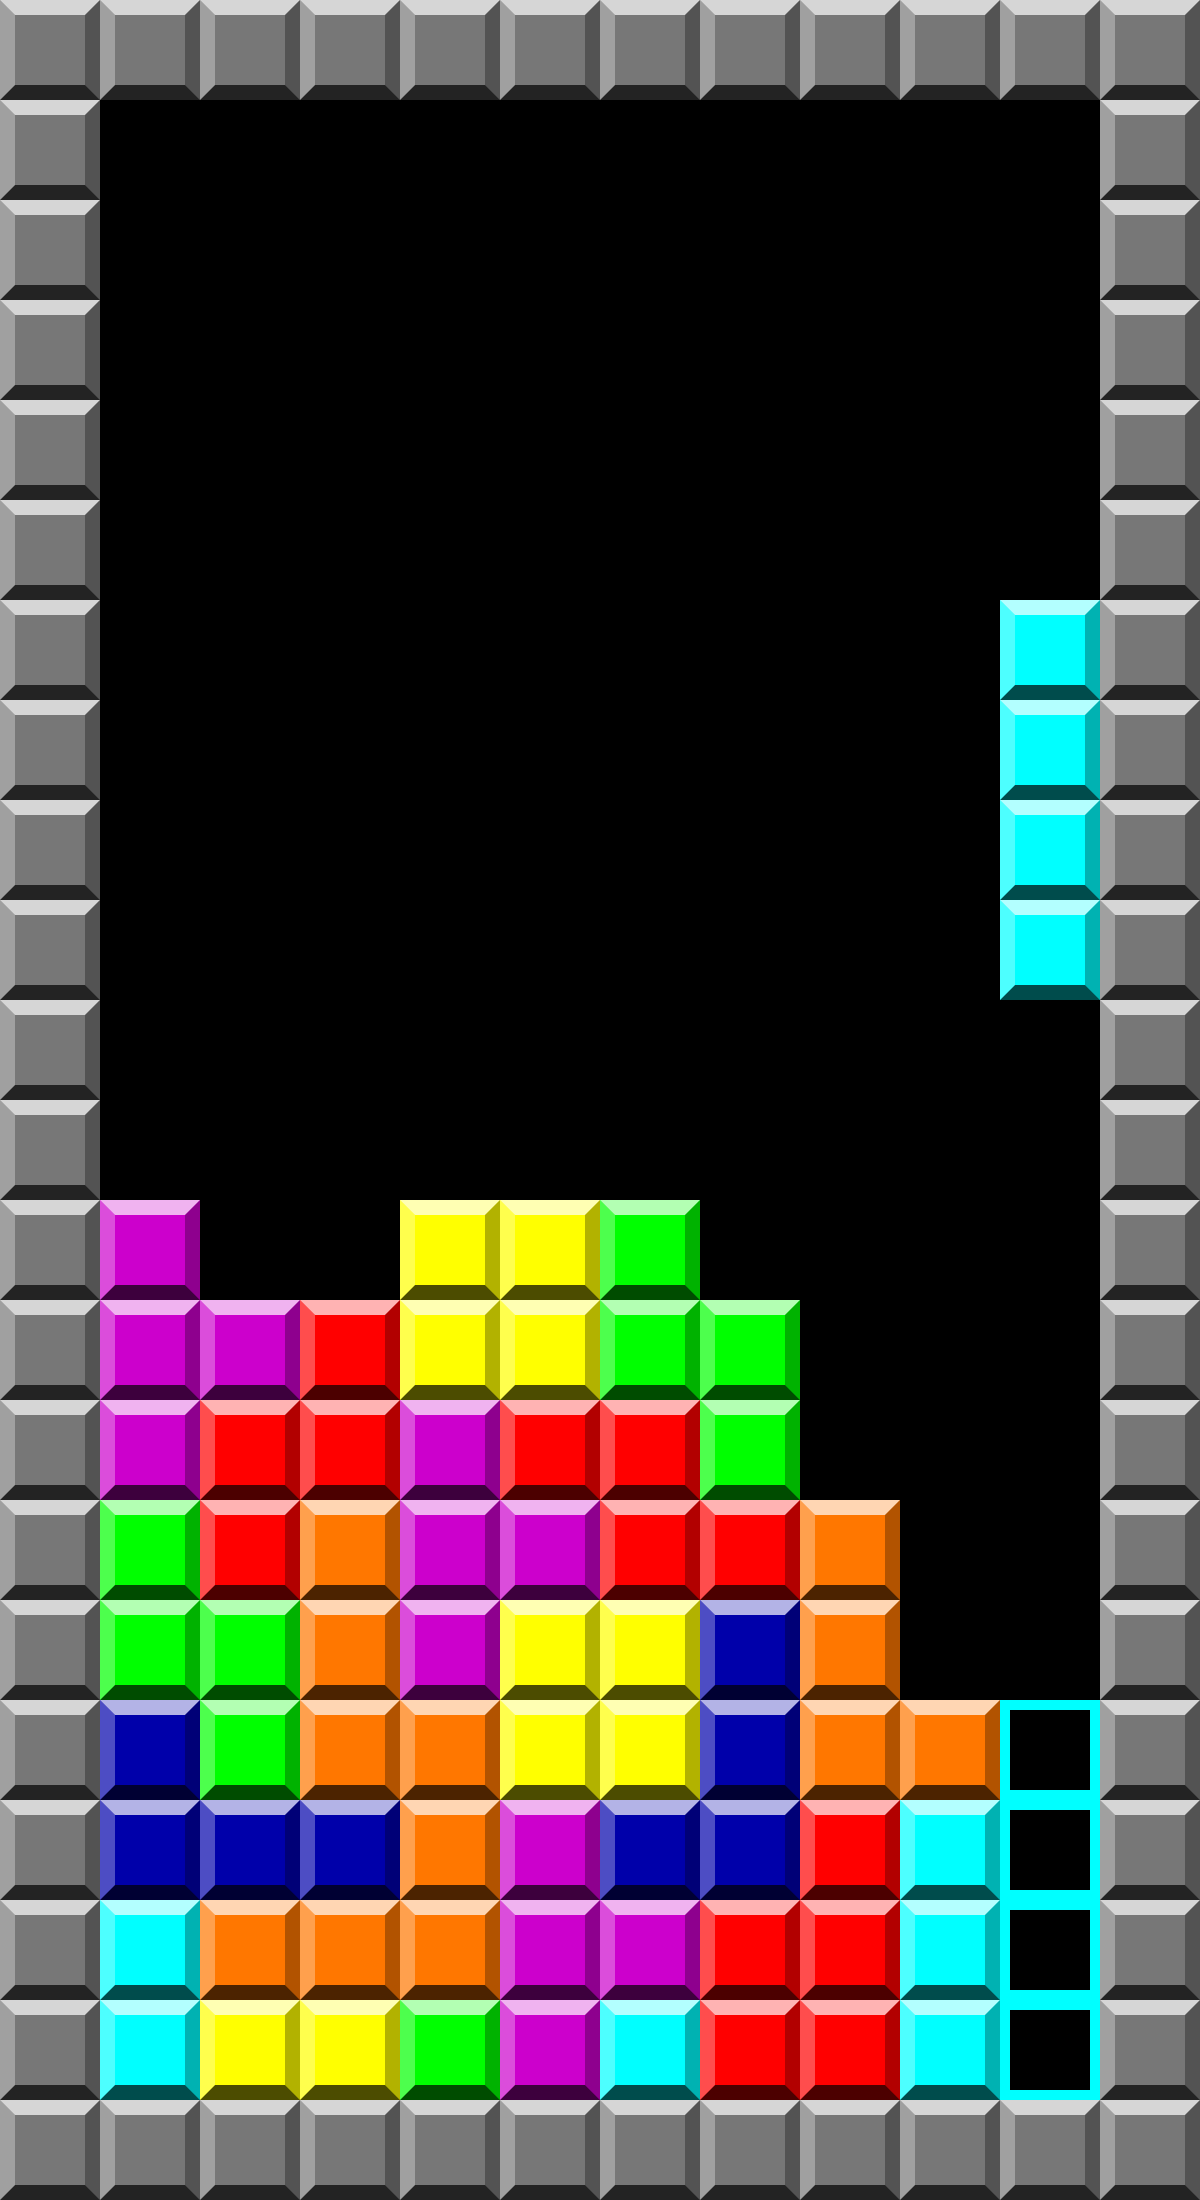 What is immersion? Playing Tetris can create ‘immersion as absorption’ - it’s highly engaging but you don’t actually think bricks are falling from the sky. Can you even imagine. The picture shows the original Tetris interface, where a series of coloured shapes fall and are positioned to interlock by the player.